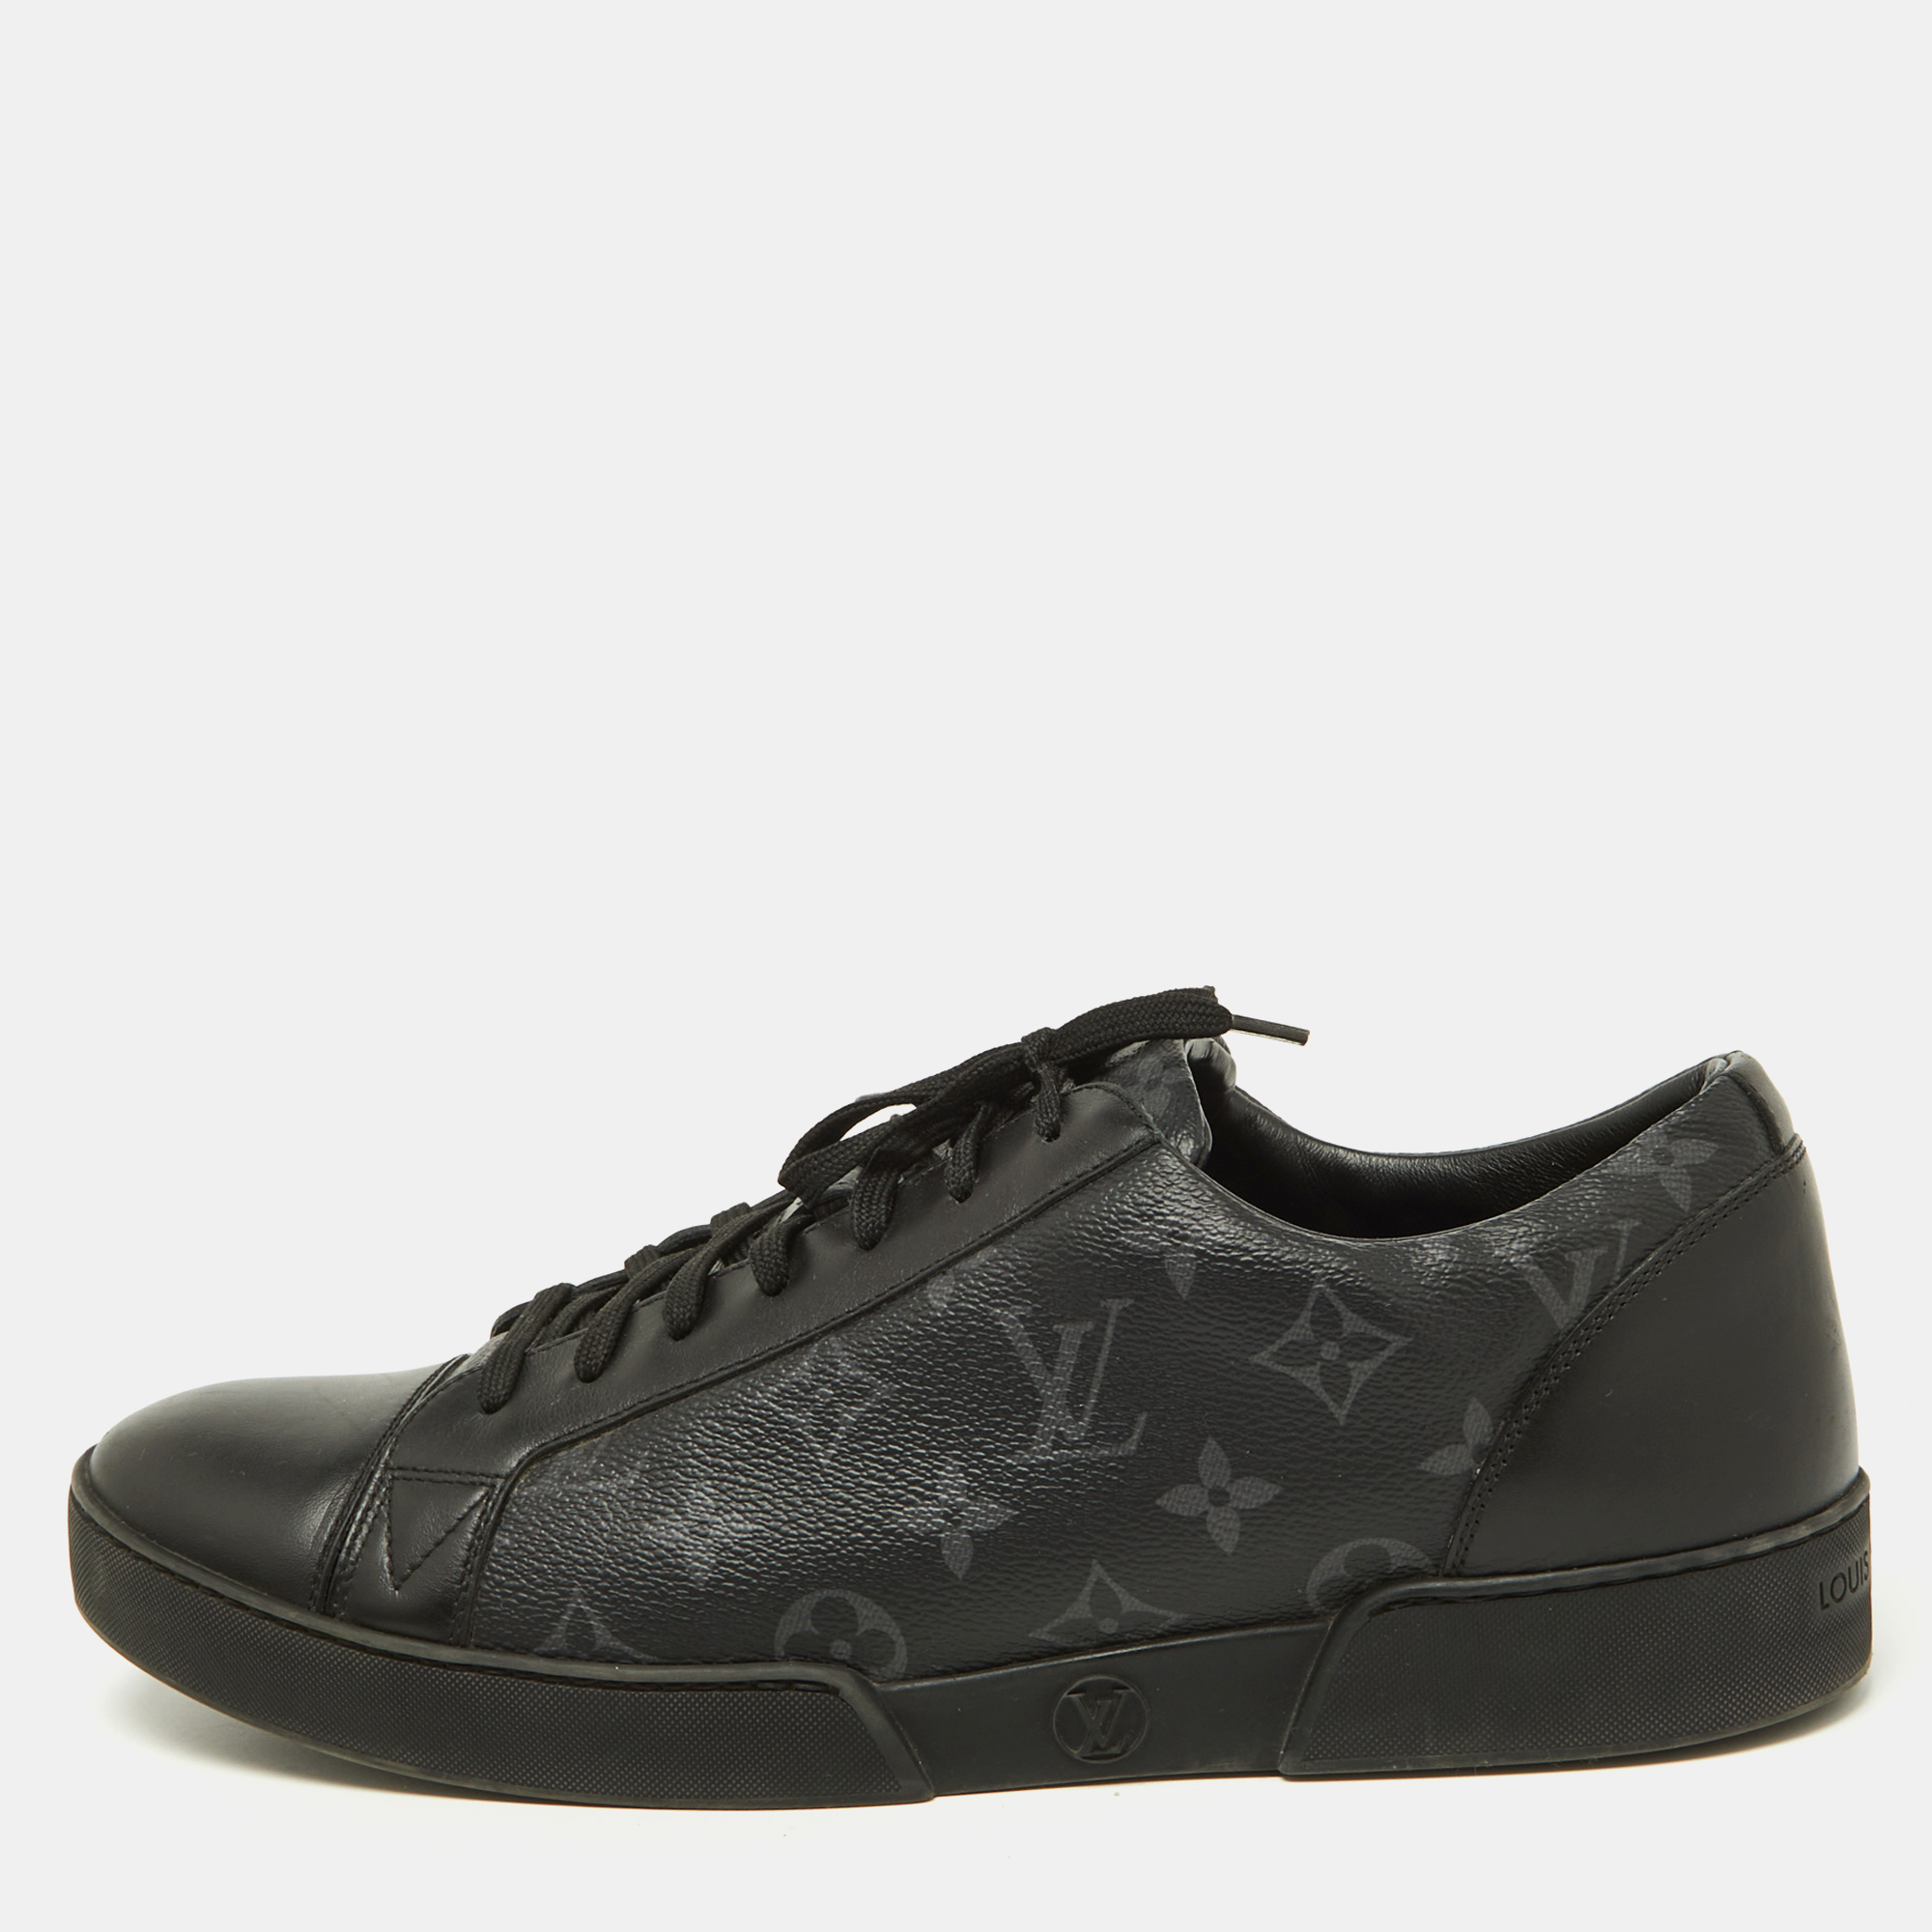 Pre-owned Louis Vuitton Black Leather And Monogram Eclipse Canvas Match Up Sneaker Size 42.5